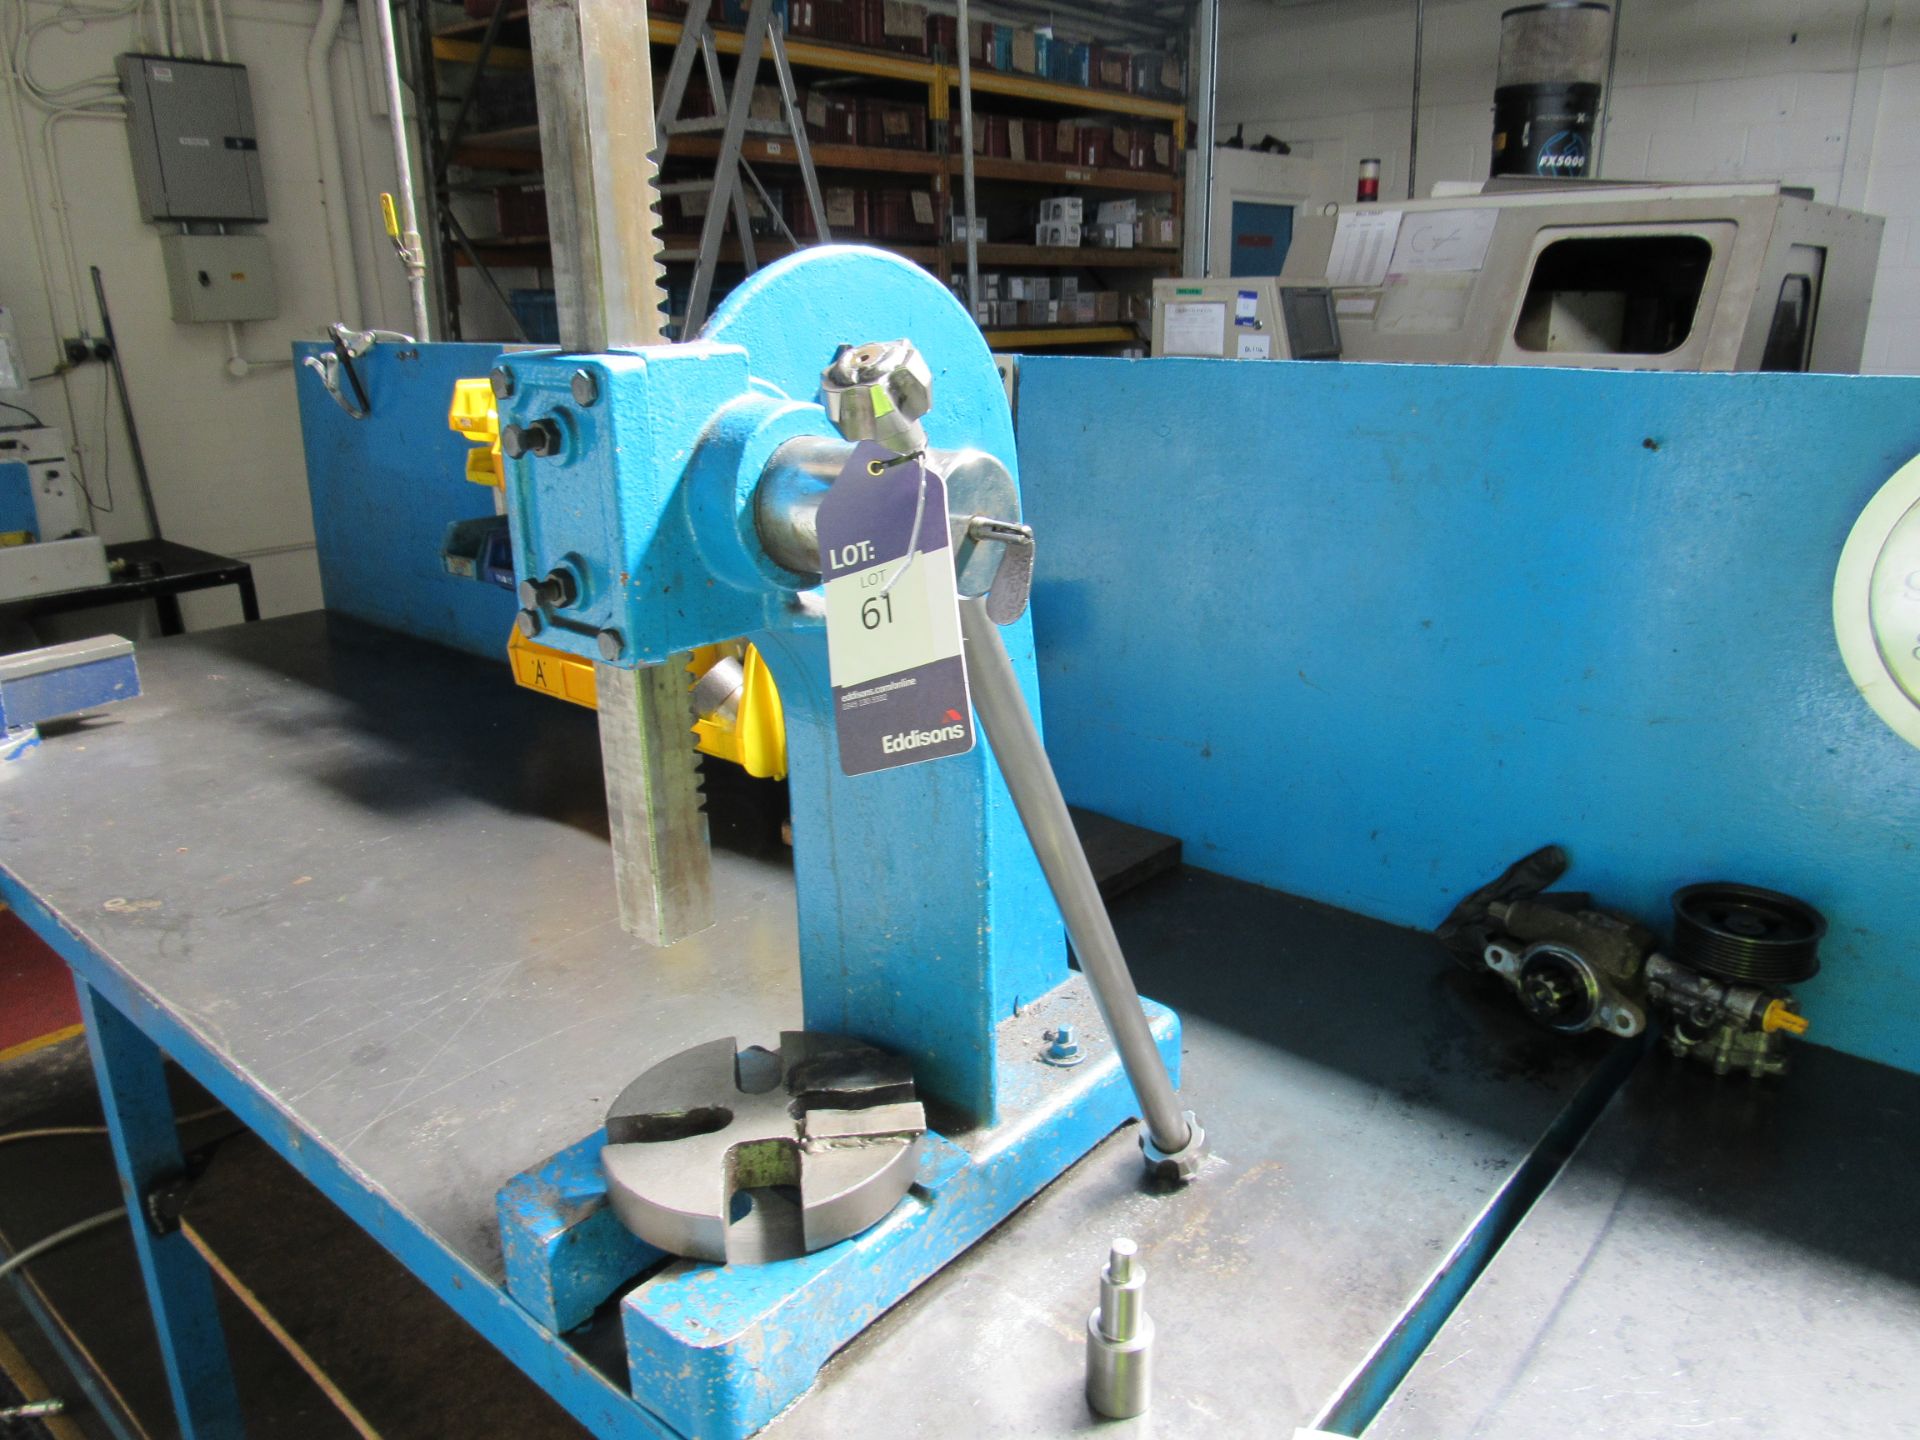 Workbench with geared press and senator 44-106 vic - Image 3 of 4